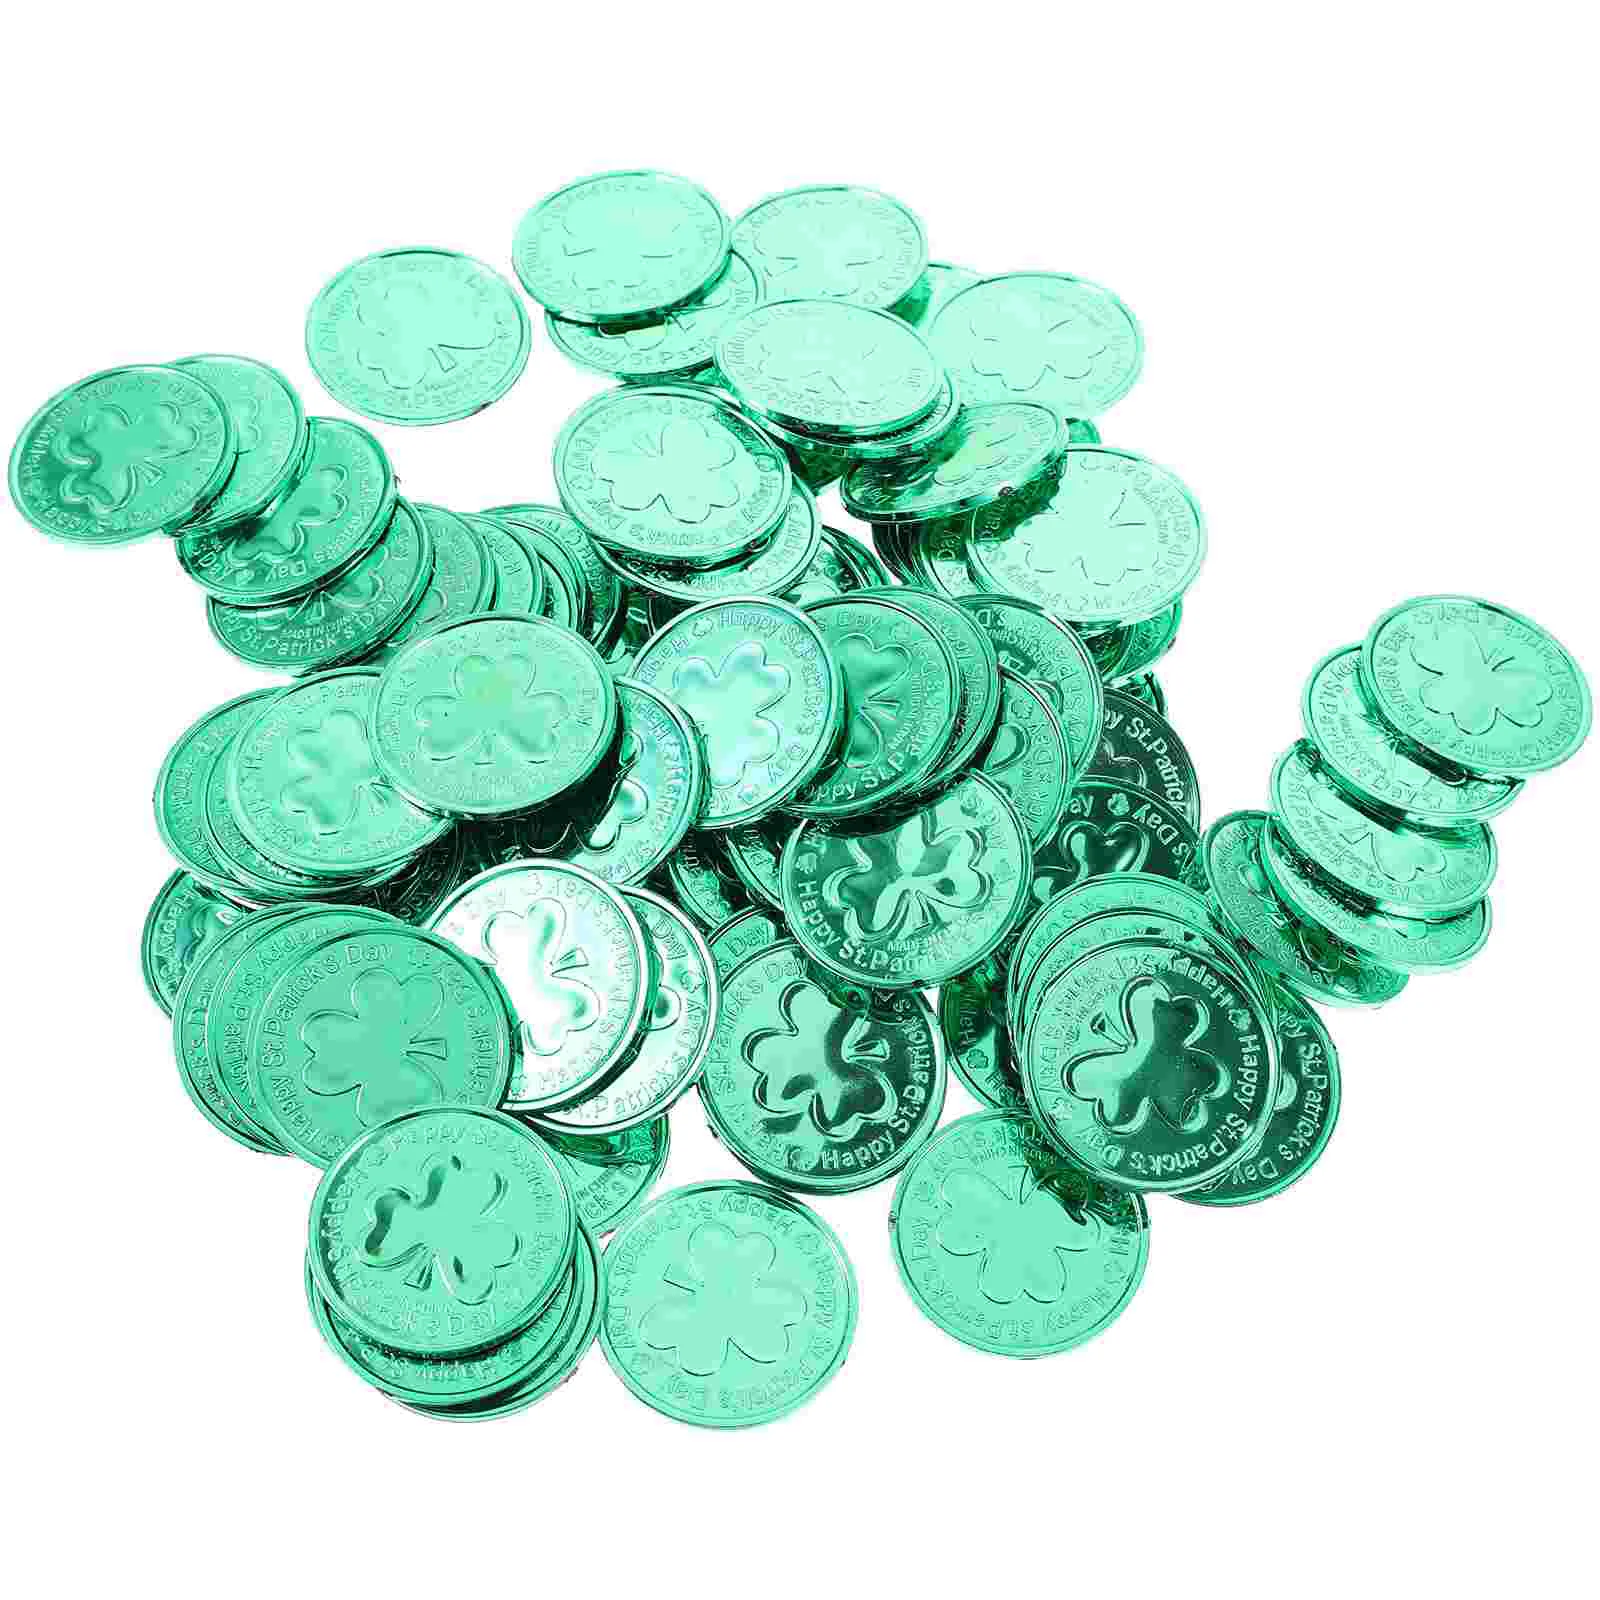 

100 Pcs St Patrick's Day Table Scatter Coin Toy Shamrock Coins Toys Decor Party Favor Luck 3-leaf